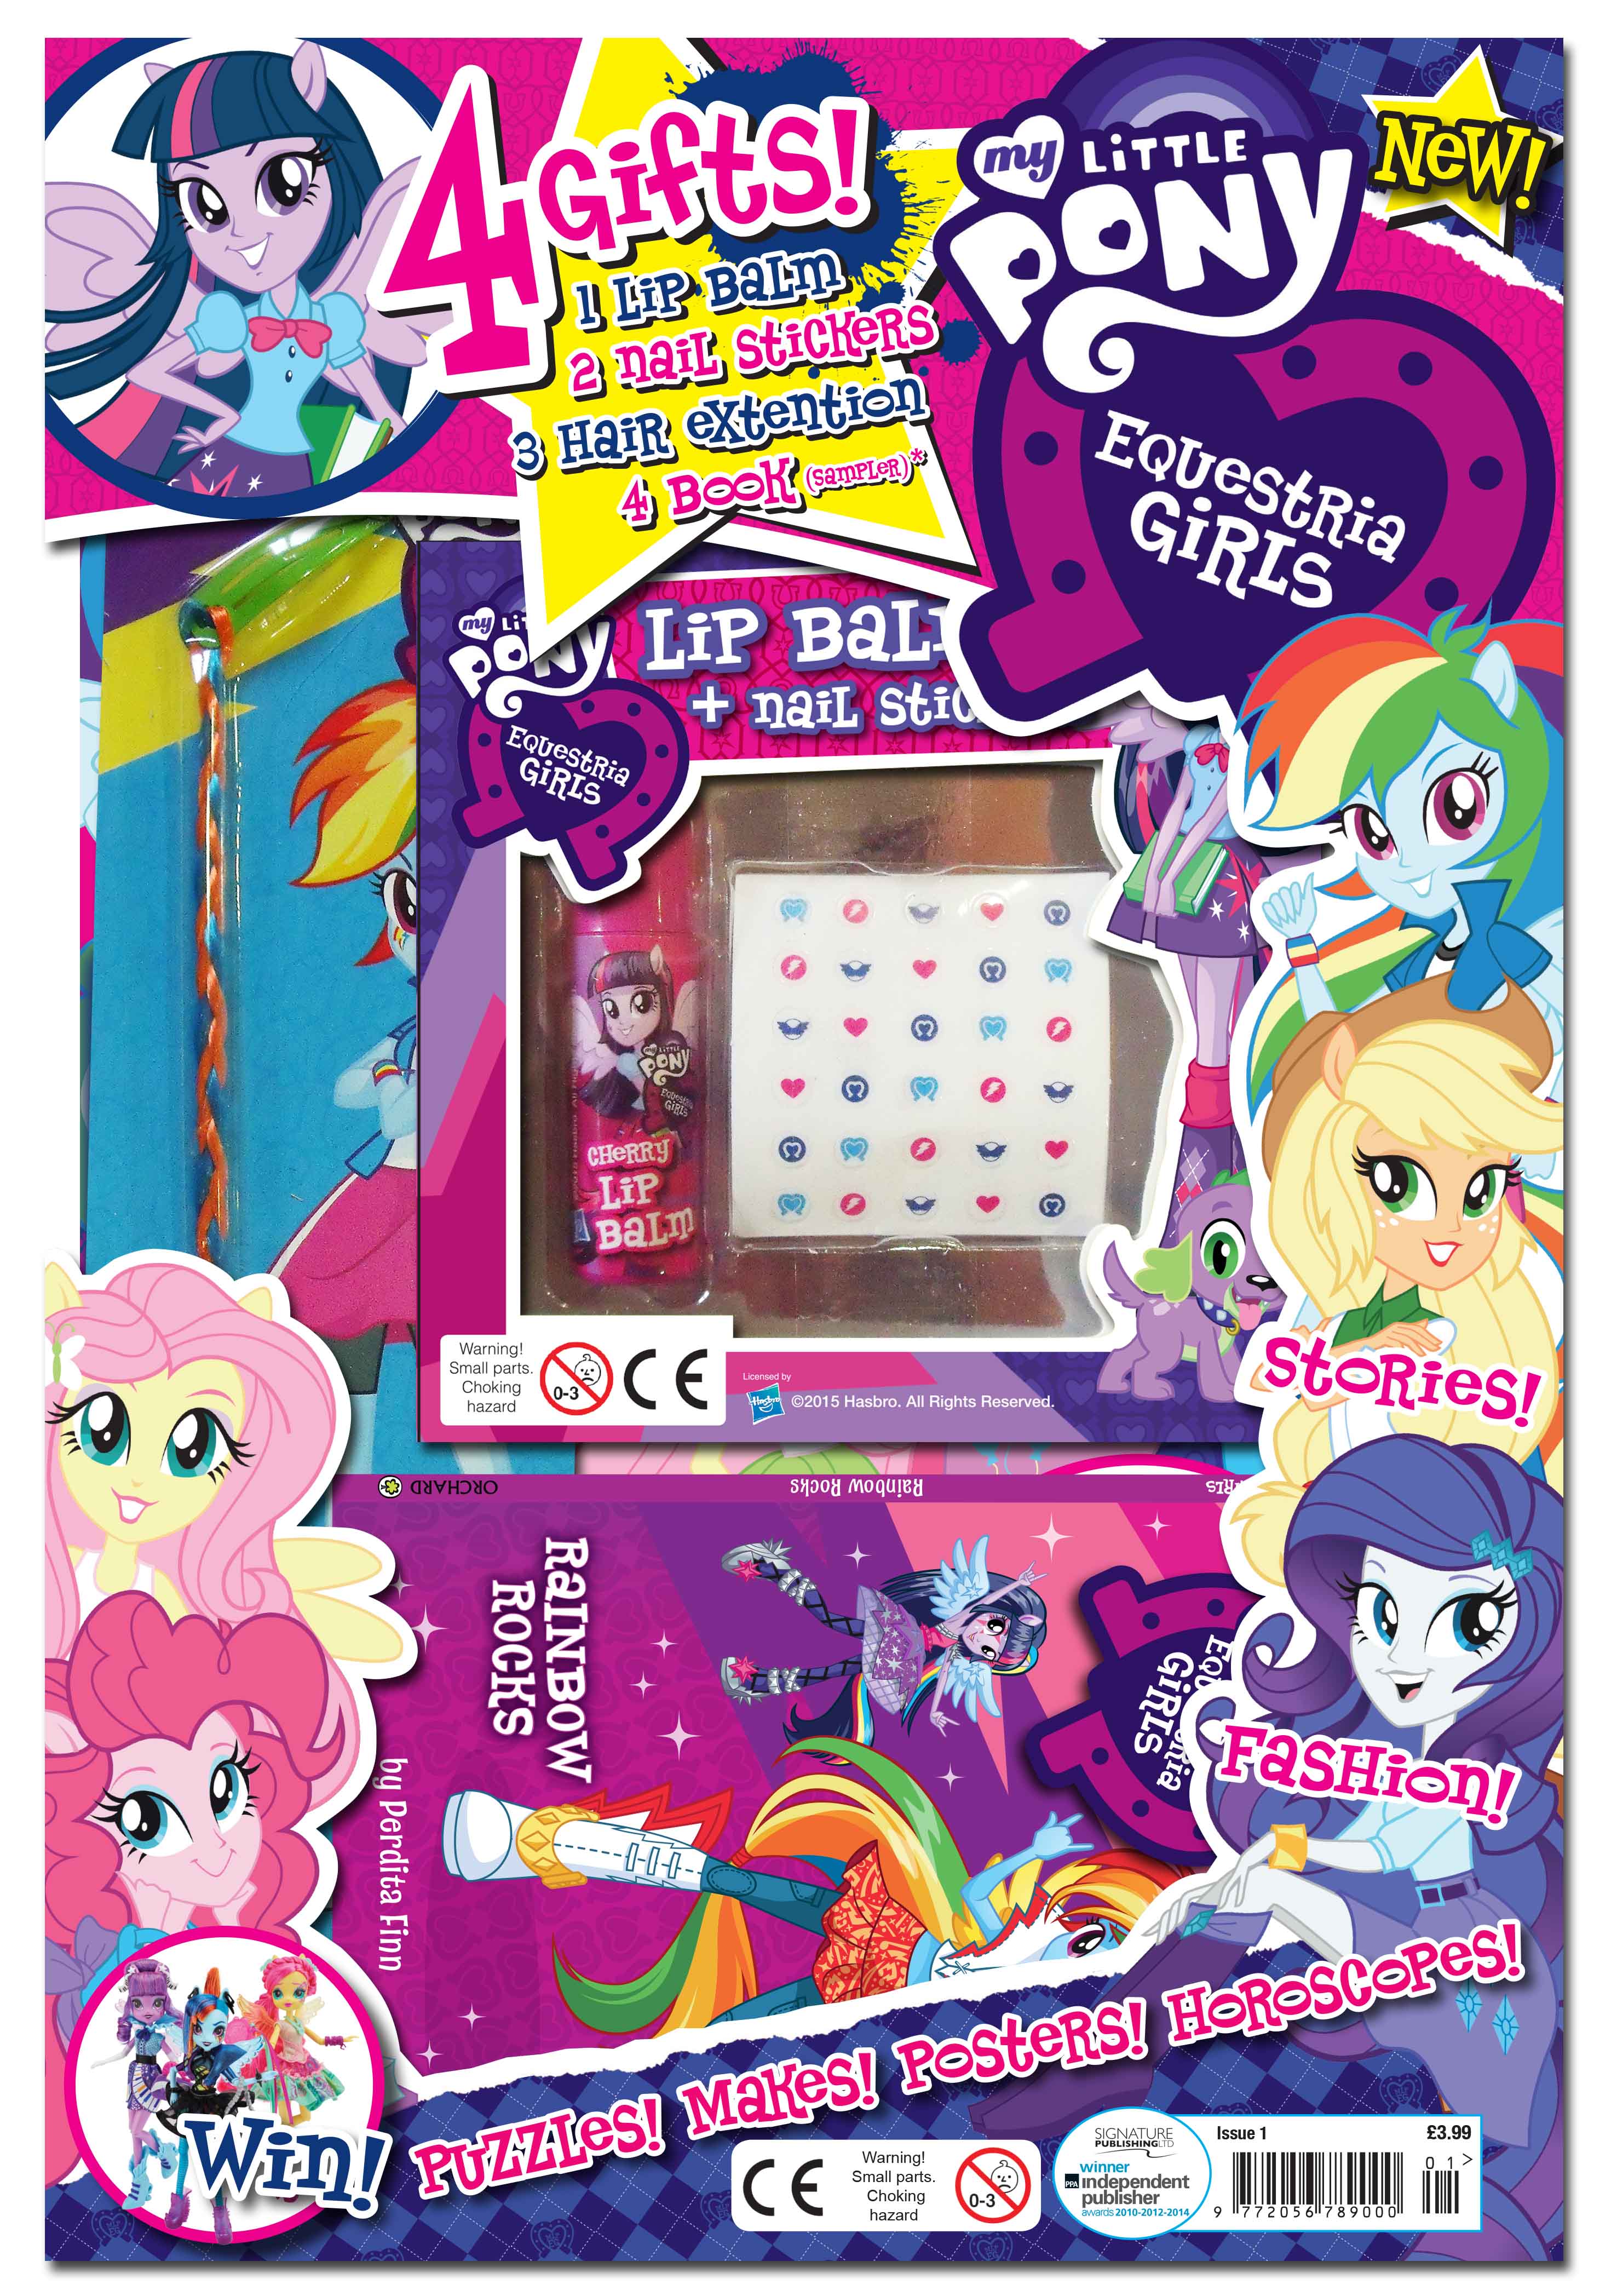 My Little Pony Equestria Girls Issue 1